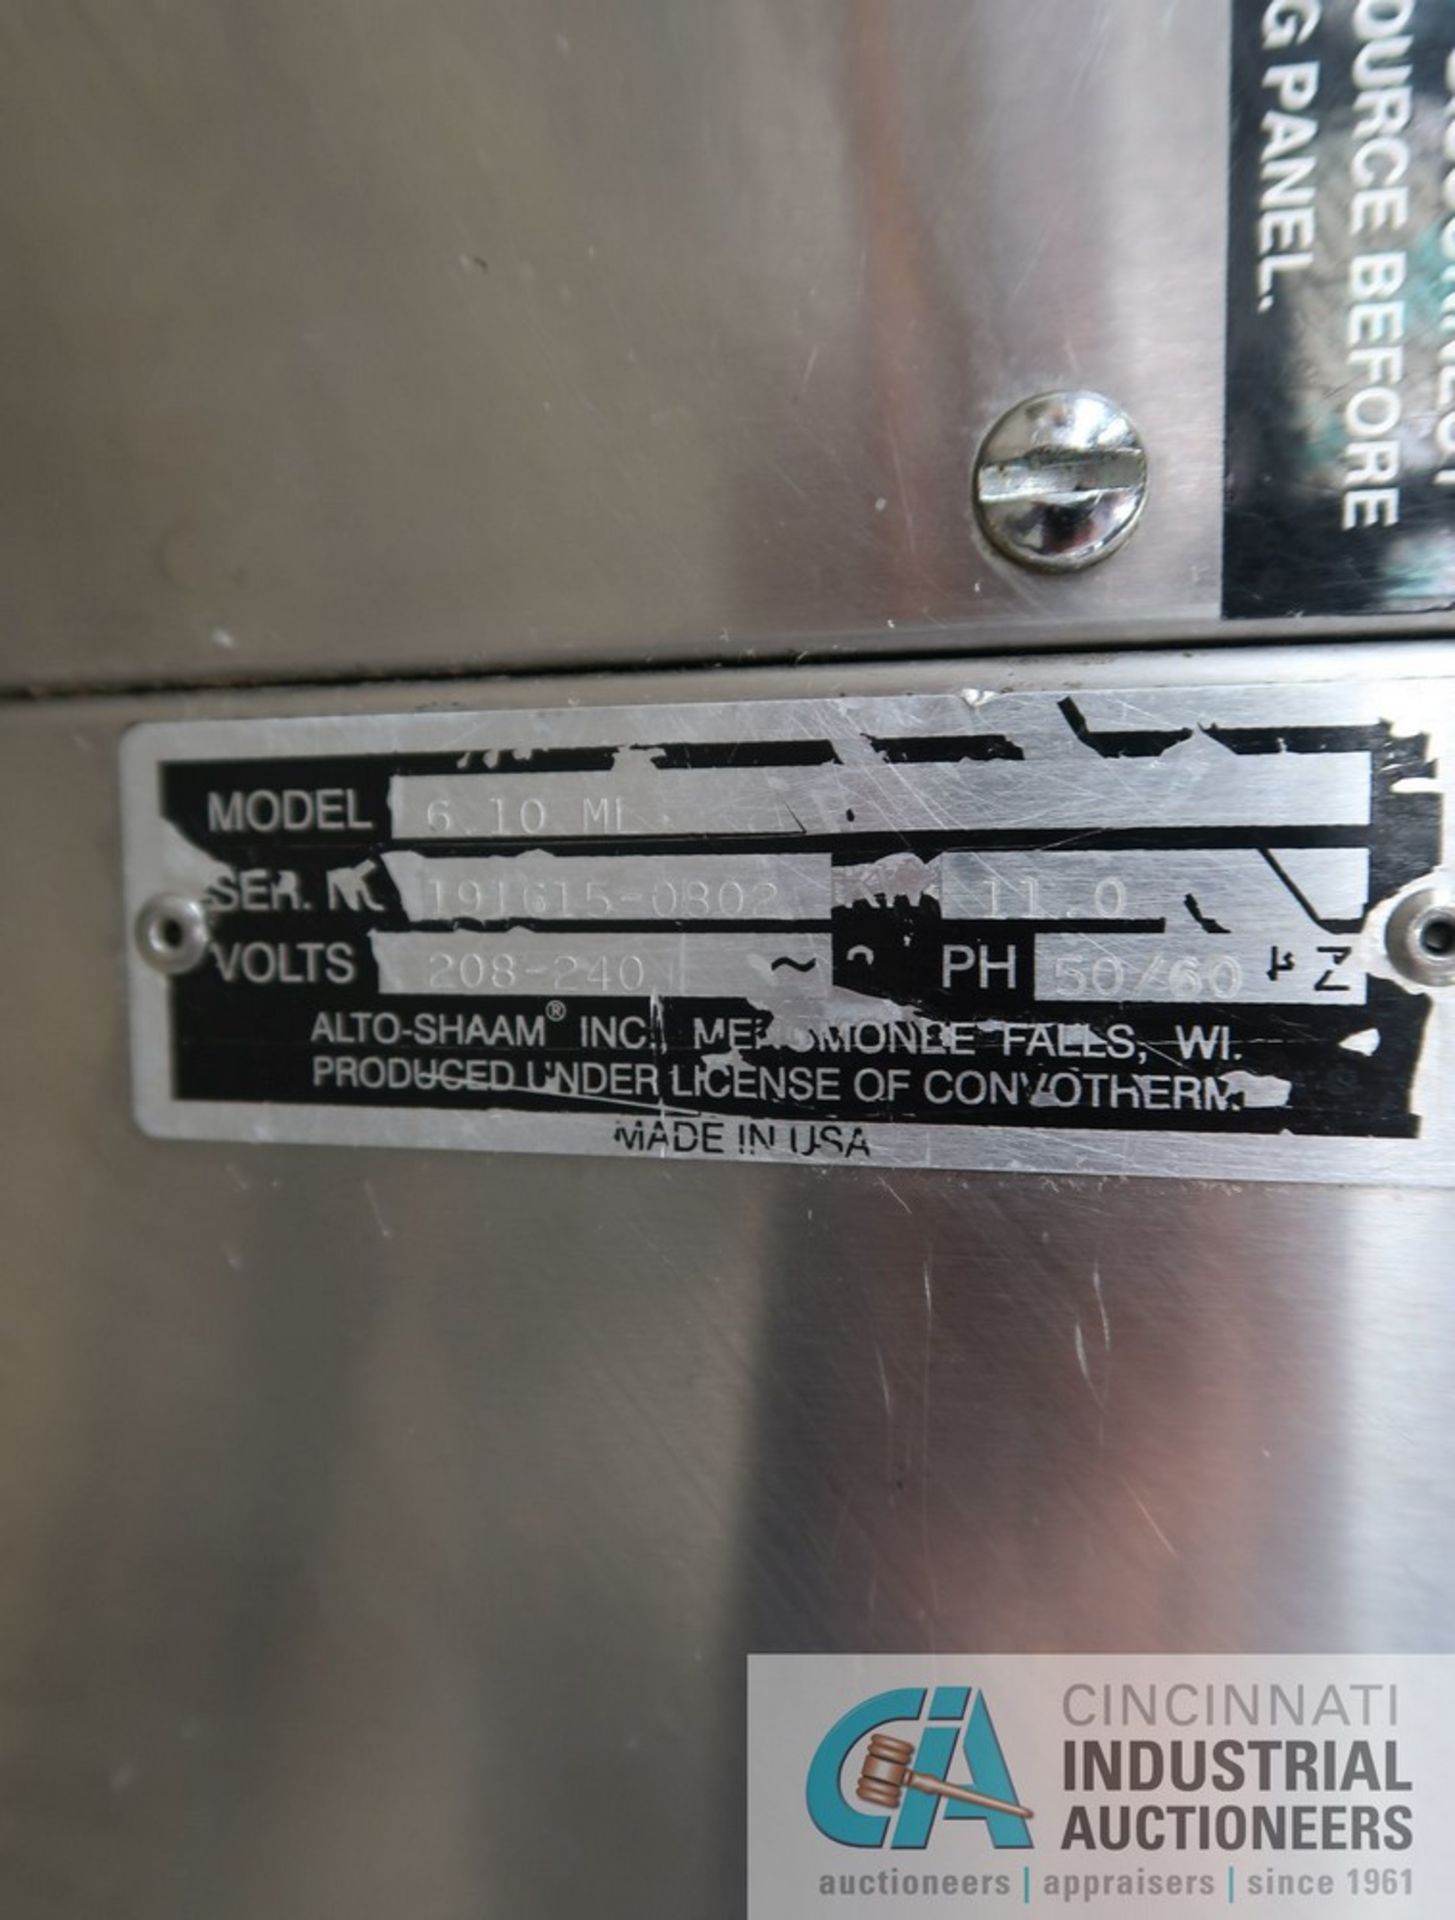 ALTO-SHAAM MODEL 6.10 ML COMBI-THERM RESTAURANT GRADE OVEN; S/N 191615-0802 - Image 4 of 5